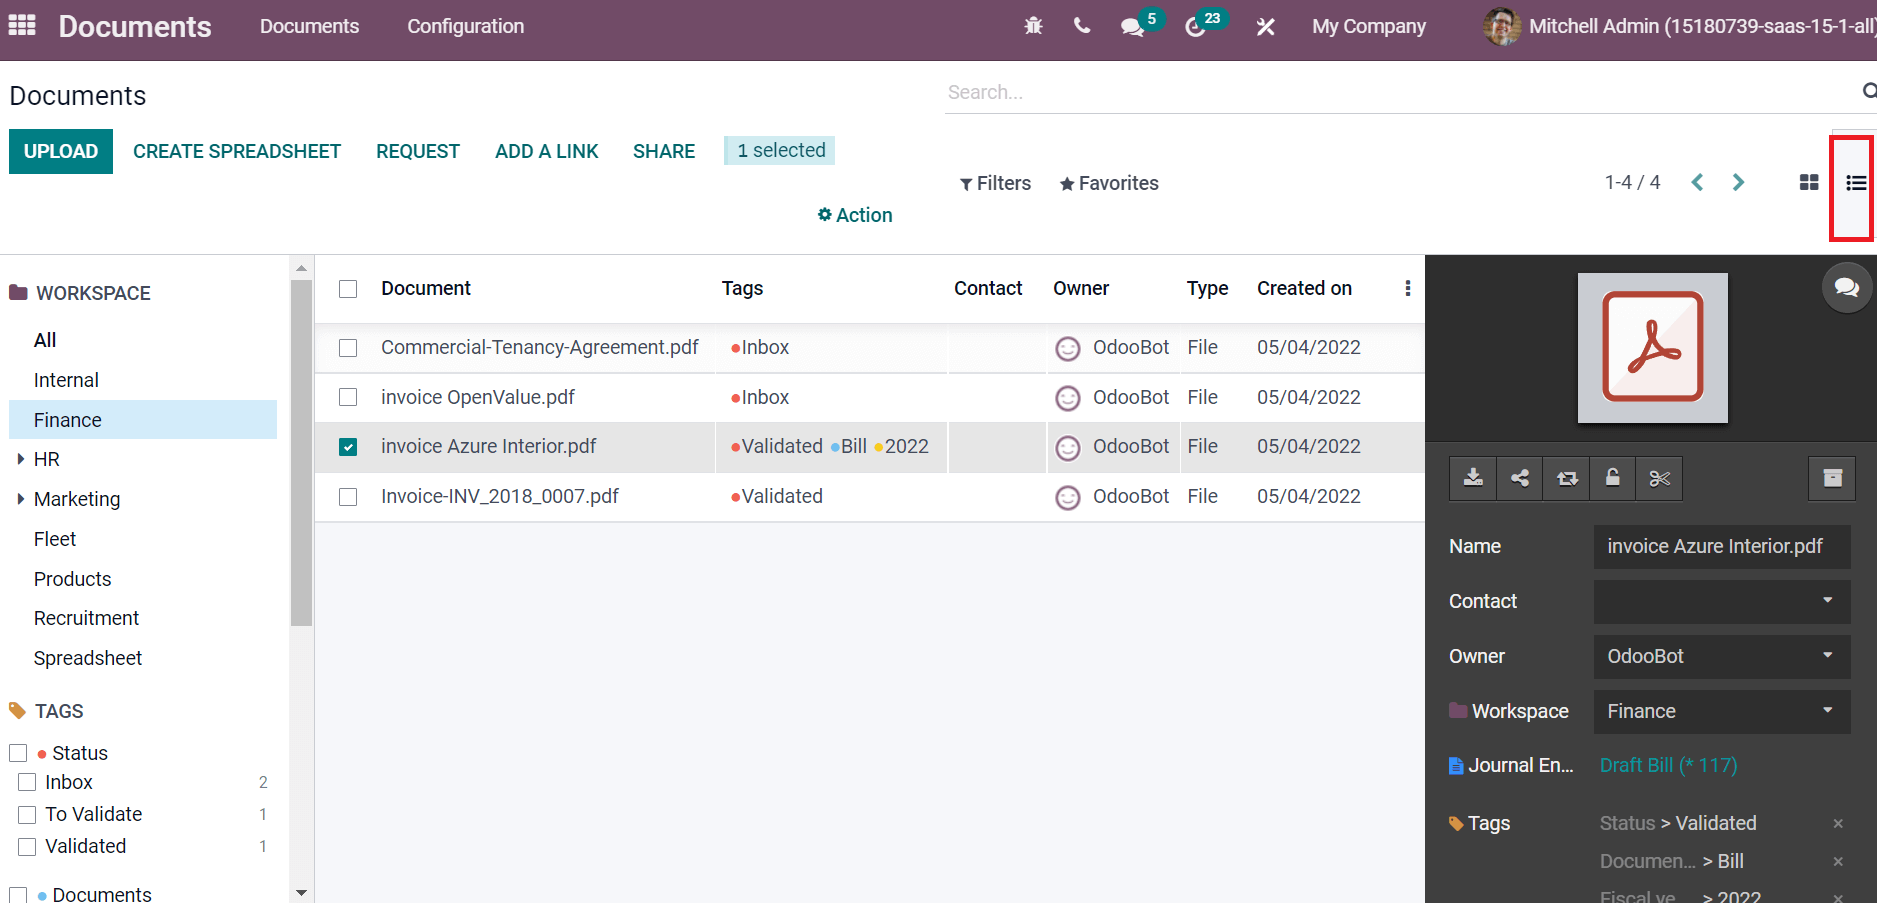 how-to-manage-accounting-documents-with-the-odoo-15-erp-cybrosys